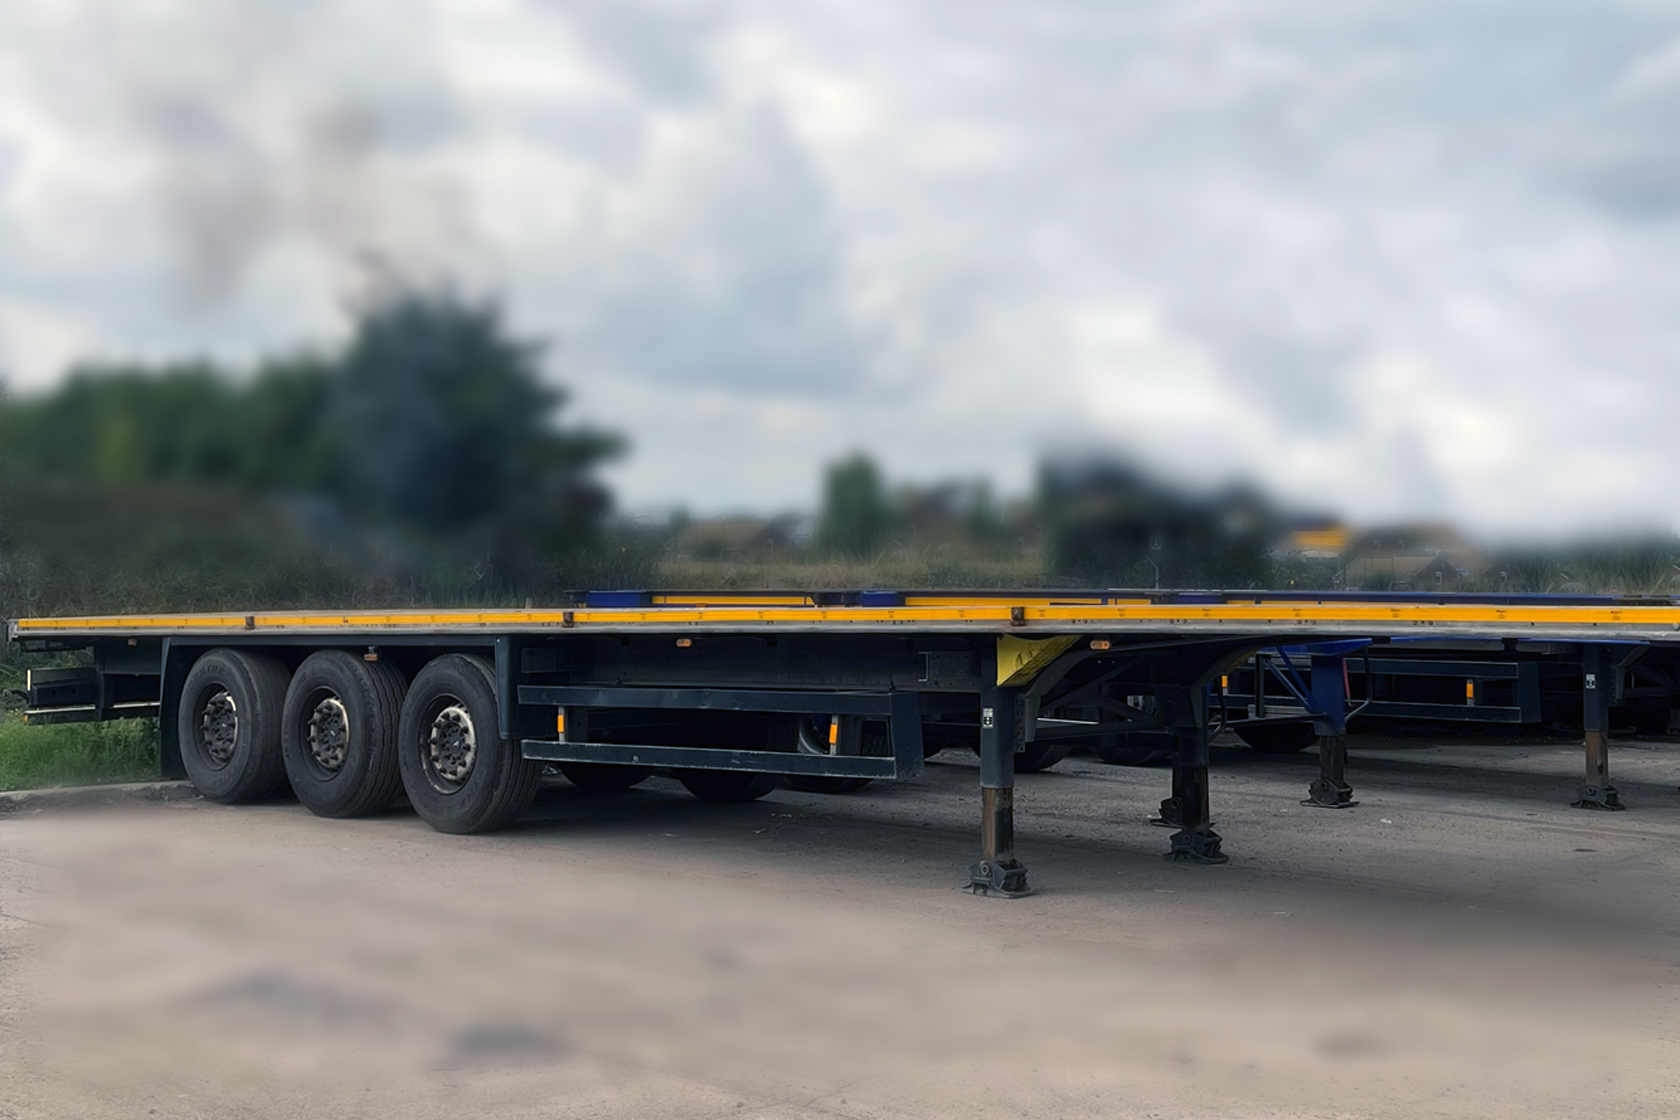 Parked JBS-Flatbed-Trailer angled with the front & side view visible